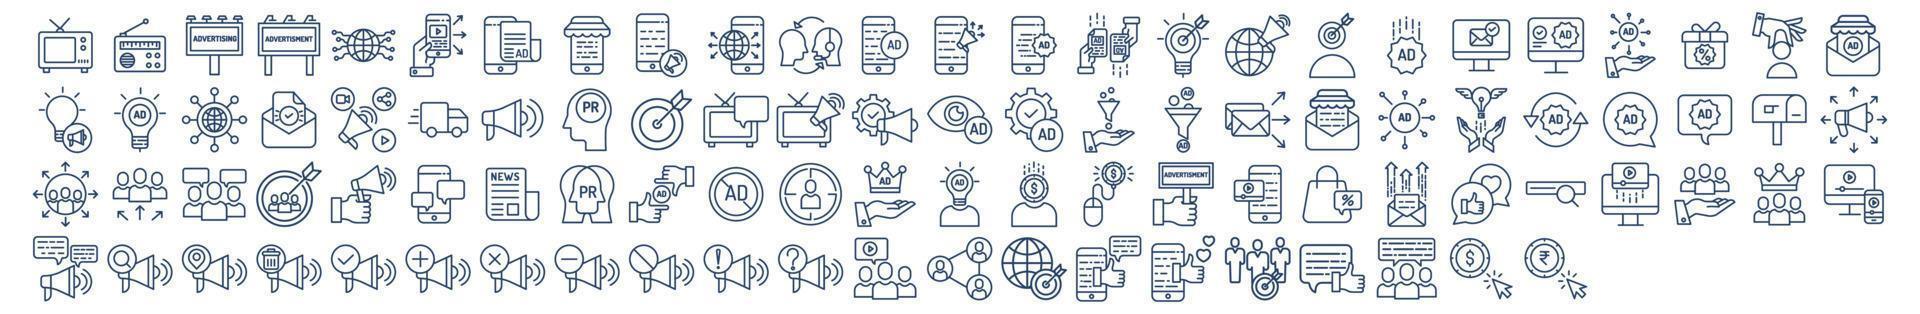 Collection of icons related toAdvertisement and marketing, including icons like shop, online marketing, computer and more. vector illustrations, Pixel Perfect